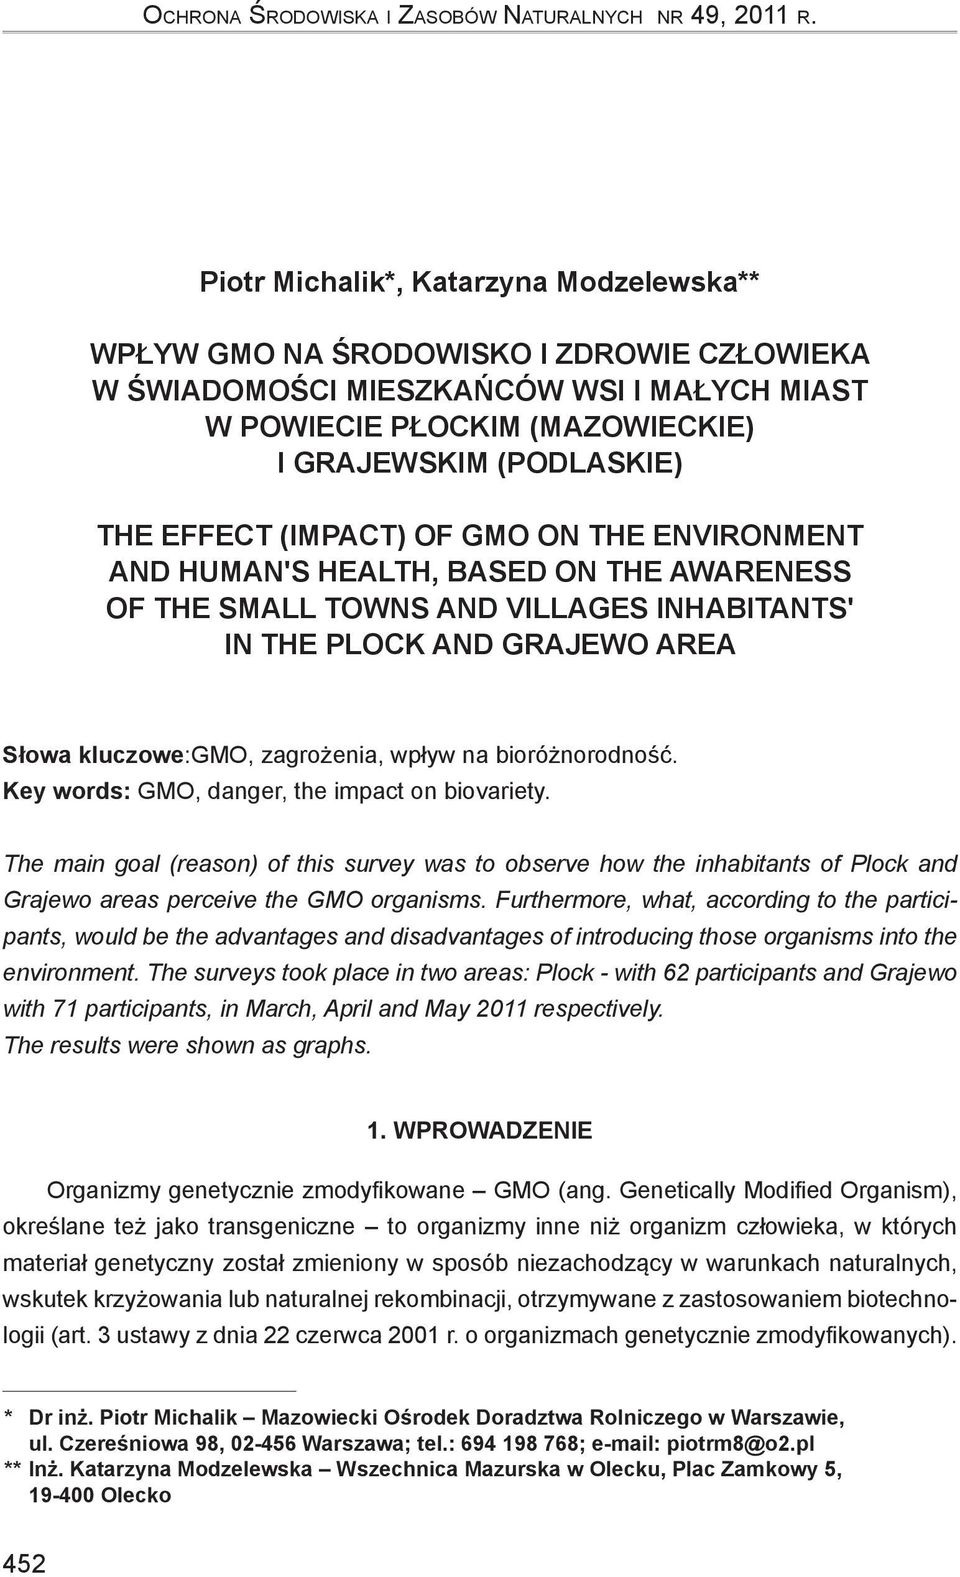 (impact) of GMO on the environment and human's health, based on the awareness of the small towns and villages inhabitants' in the Plock and Grajewo area Słowa kluczowe:gmo, zagrożenia, wpływ na